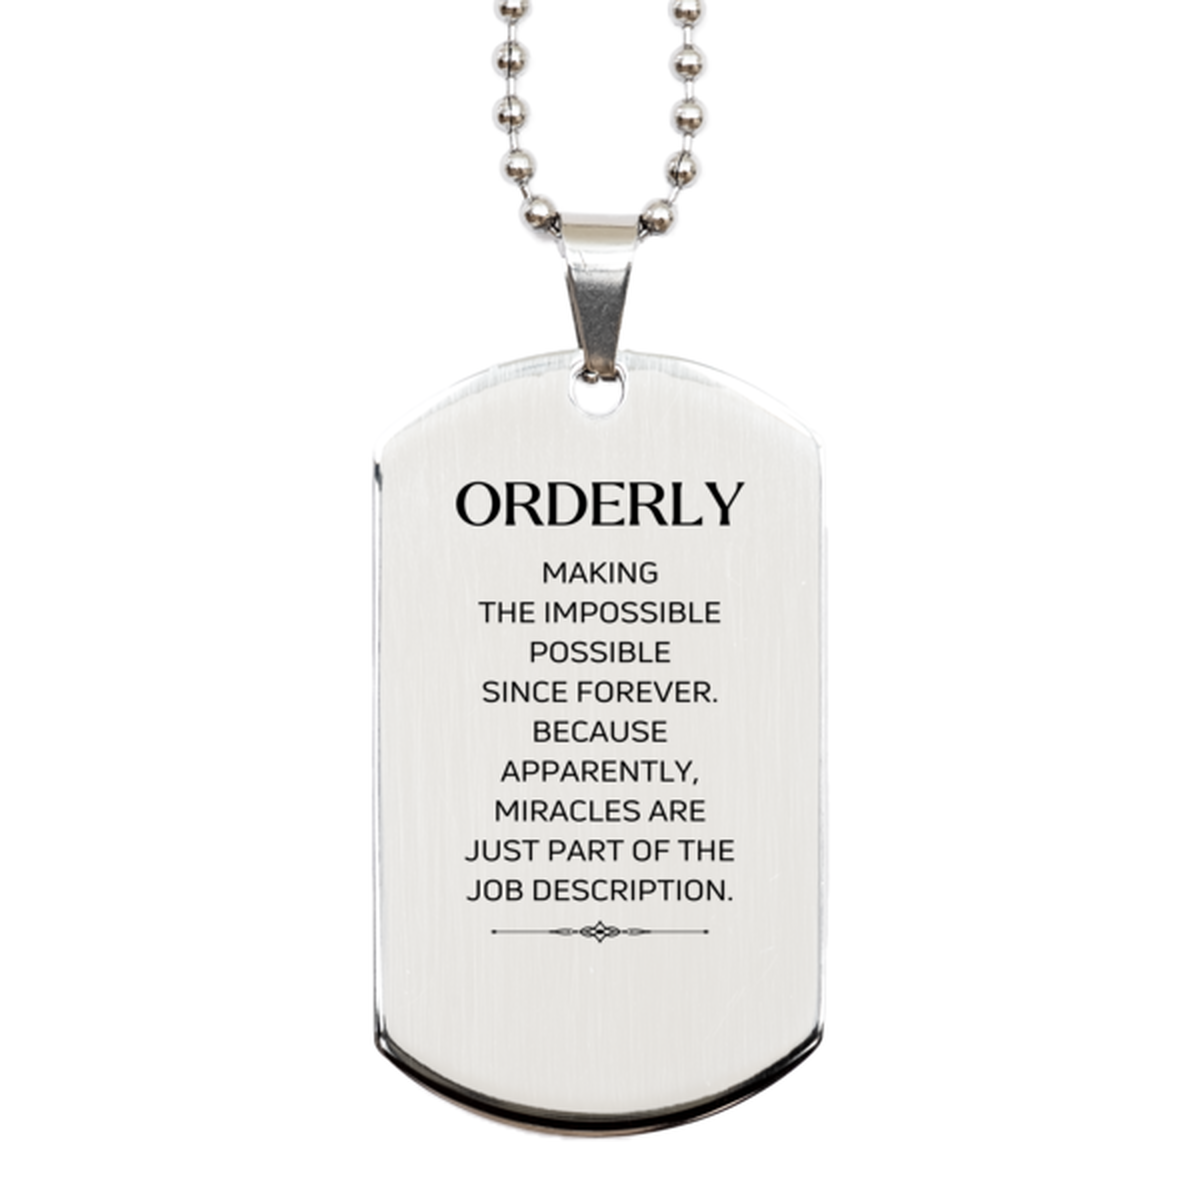 Funny Orderly Gifts, Miracles are just part of the job description, Inspirational Birthday Silver Dog Tag For Orderly, Men, Women, Coworkers, Friends, Boss